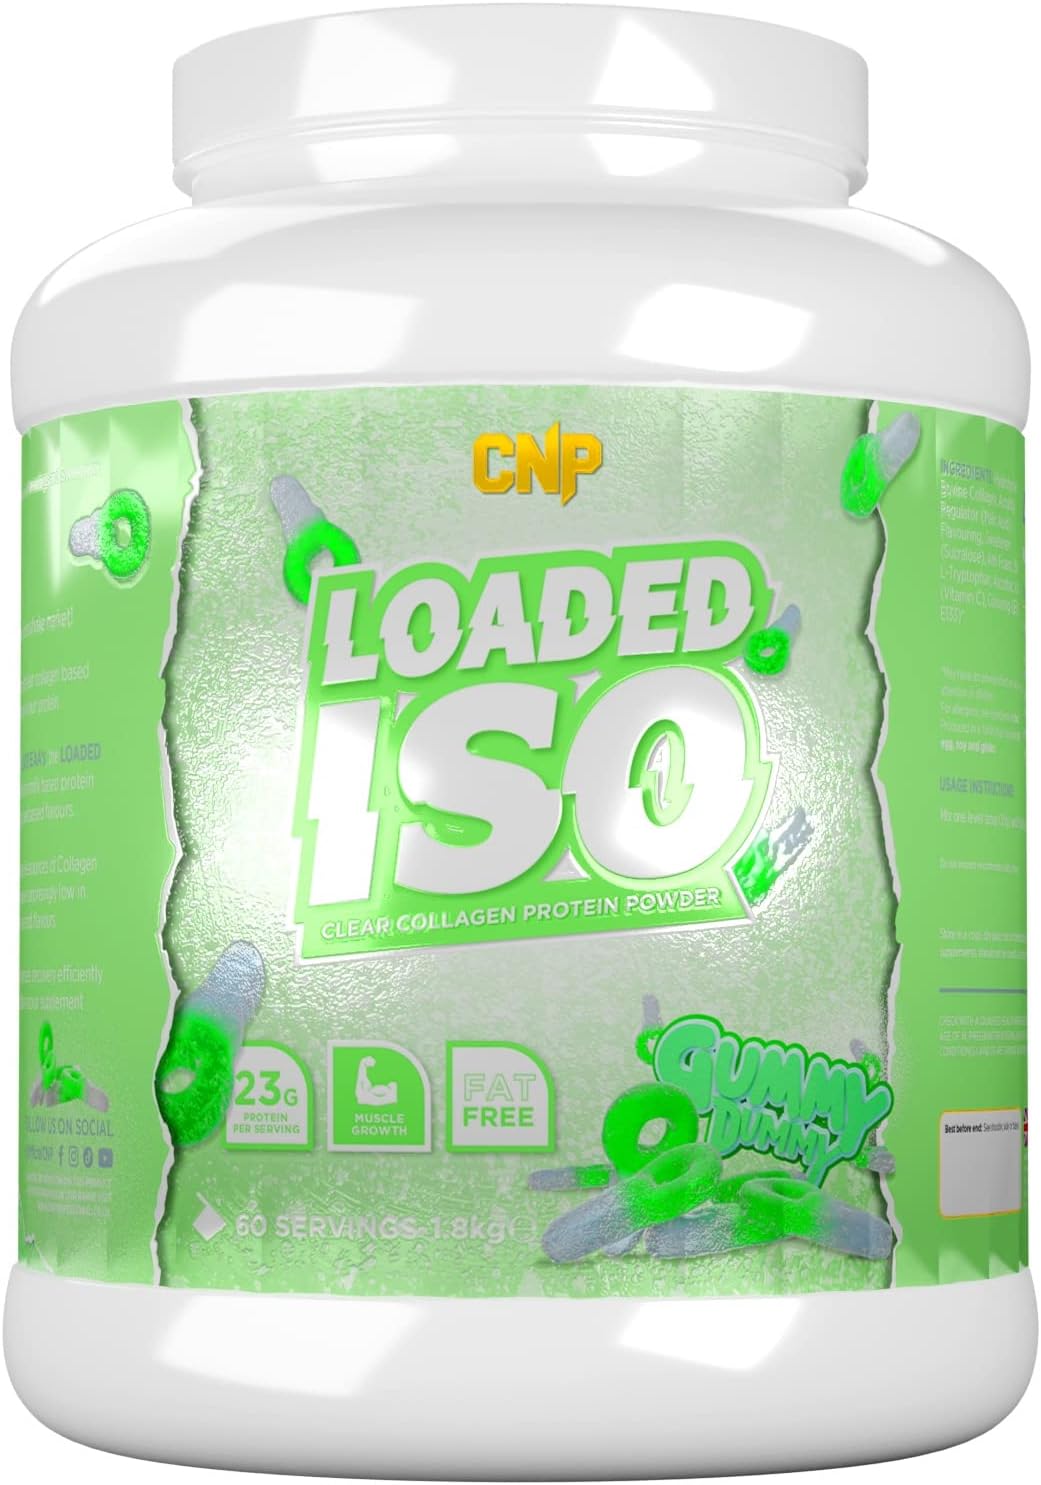 CNP Professional Loaded ISO, Clear Collagen Protein Powder, 24g Protei2.06 Kilo Grams